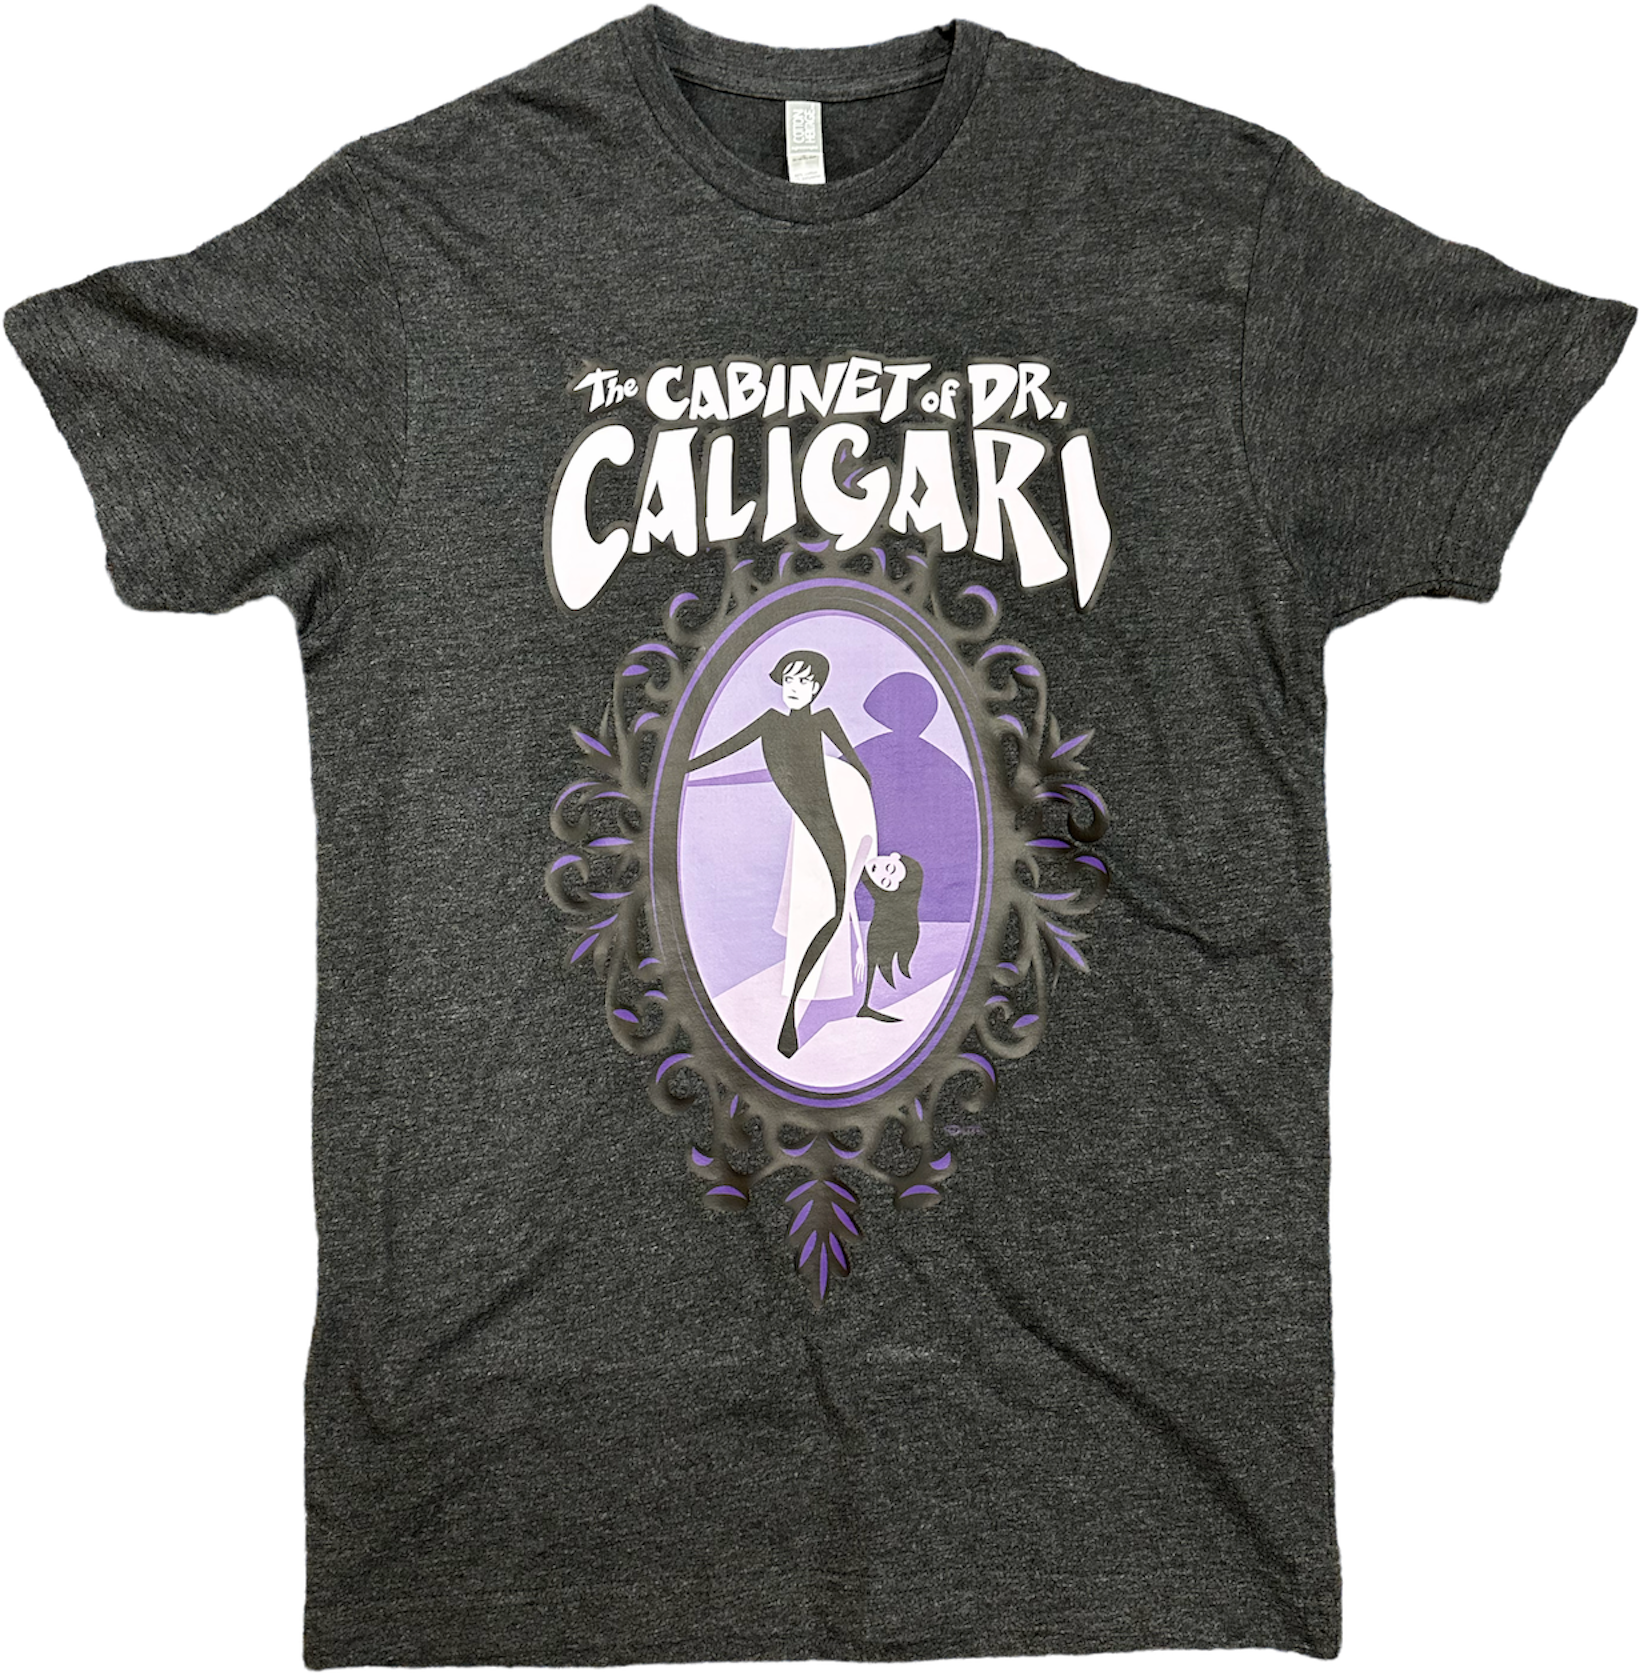 SHAG X "THE CABINET OF DR. CALIGARI" CHARCOAL T-SHIRT